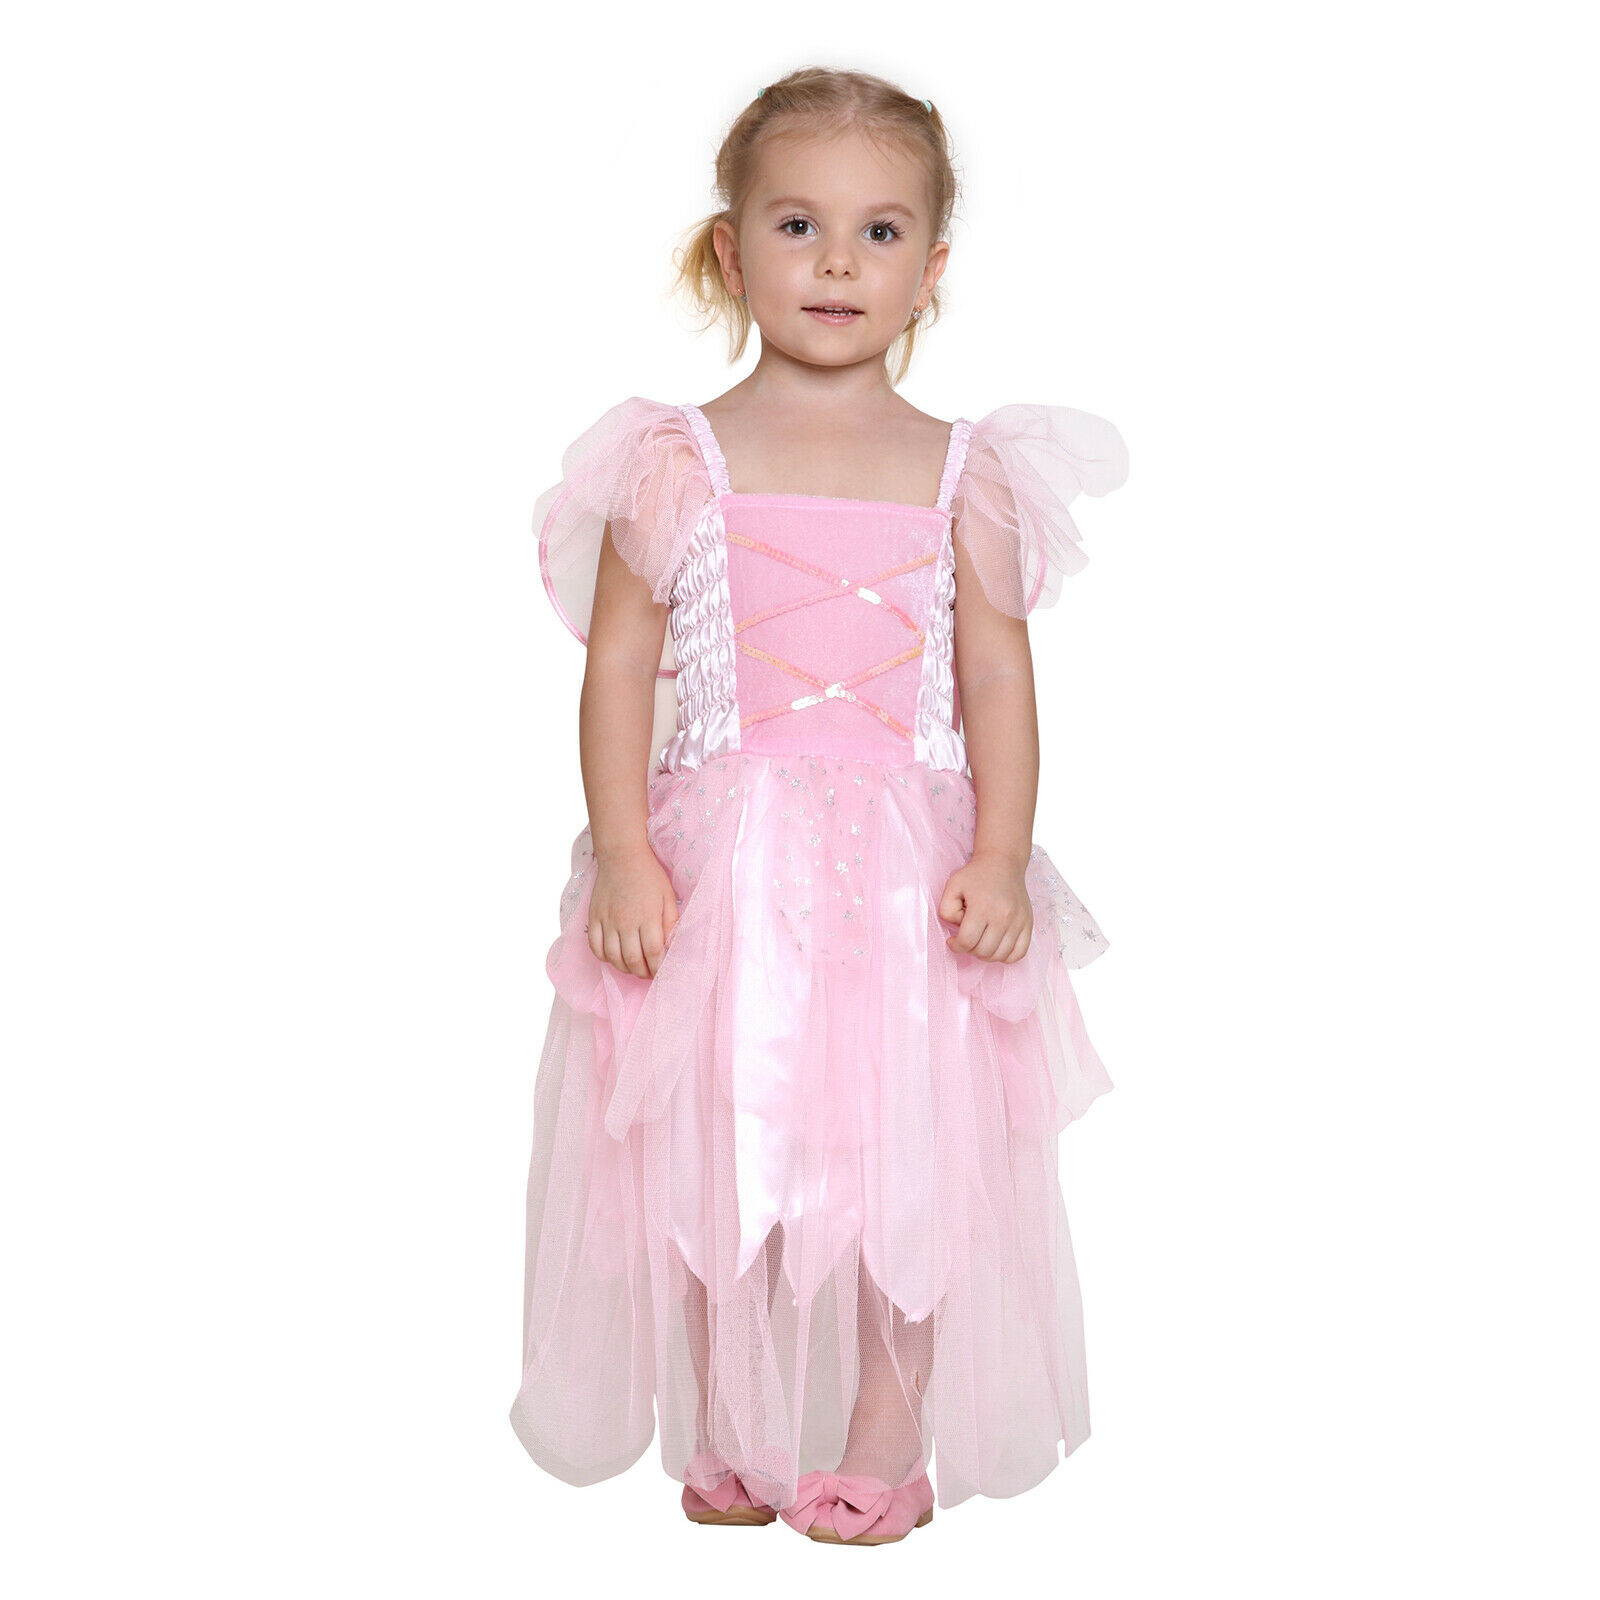 Girls Princess Pixie Butterfly Fairy Wing Dress Party Wedding Kids Costume